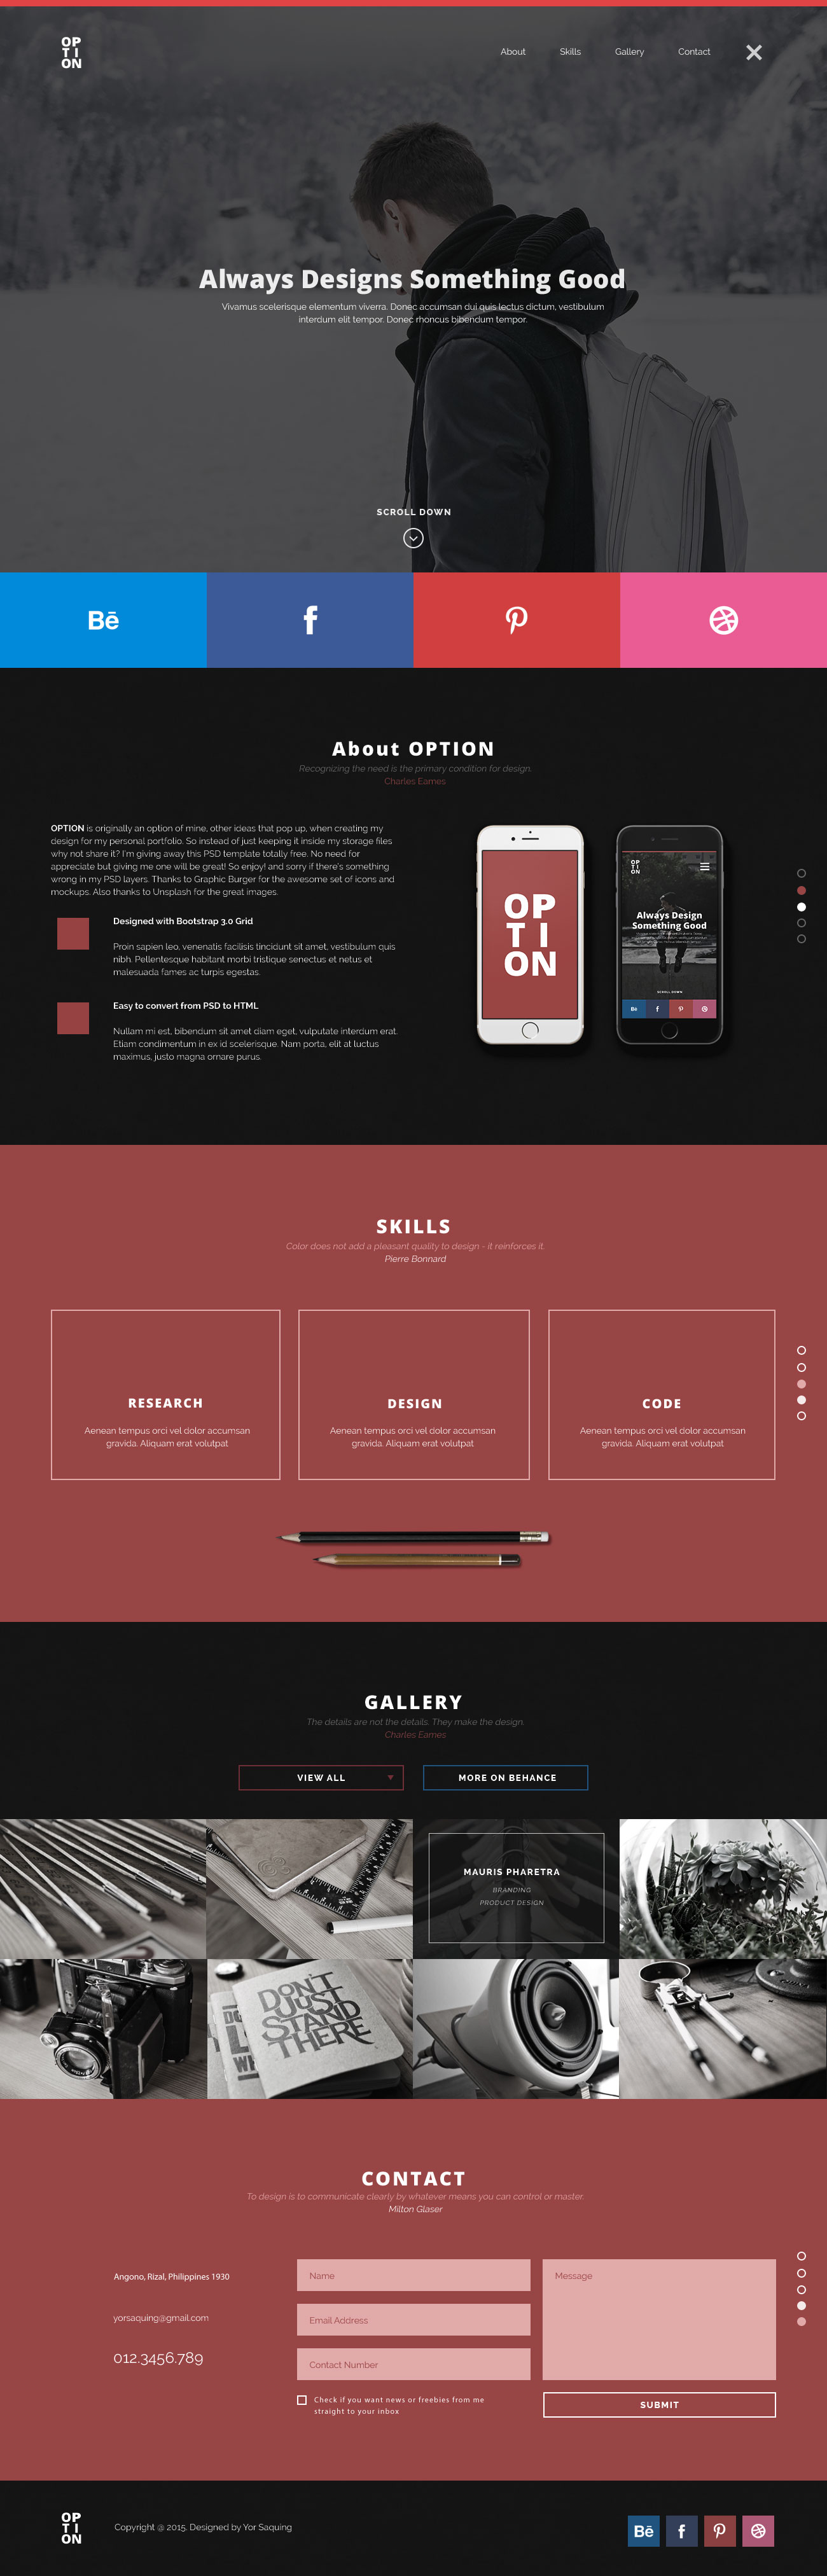 OPTION---One-Page-Free-PSD-Web-Design-Template